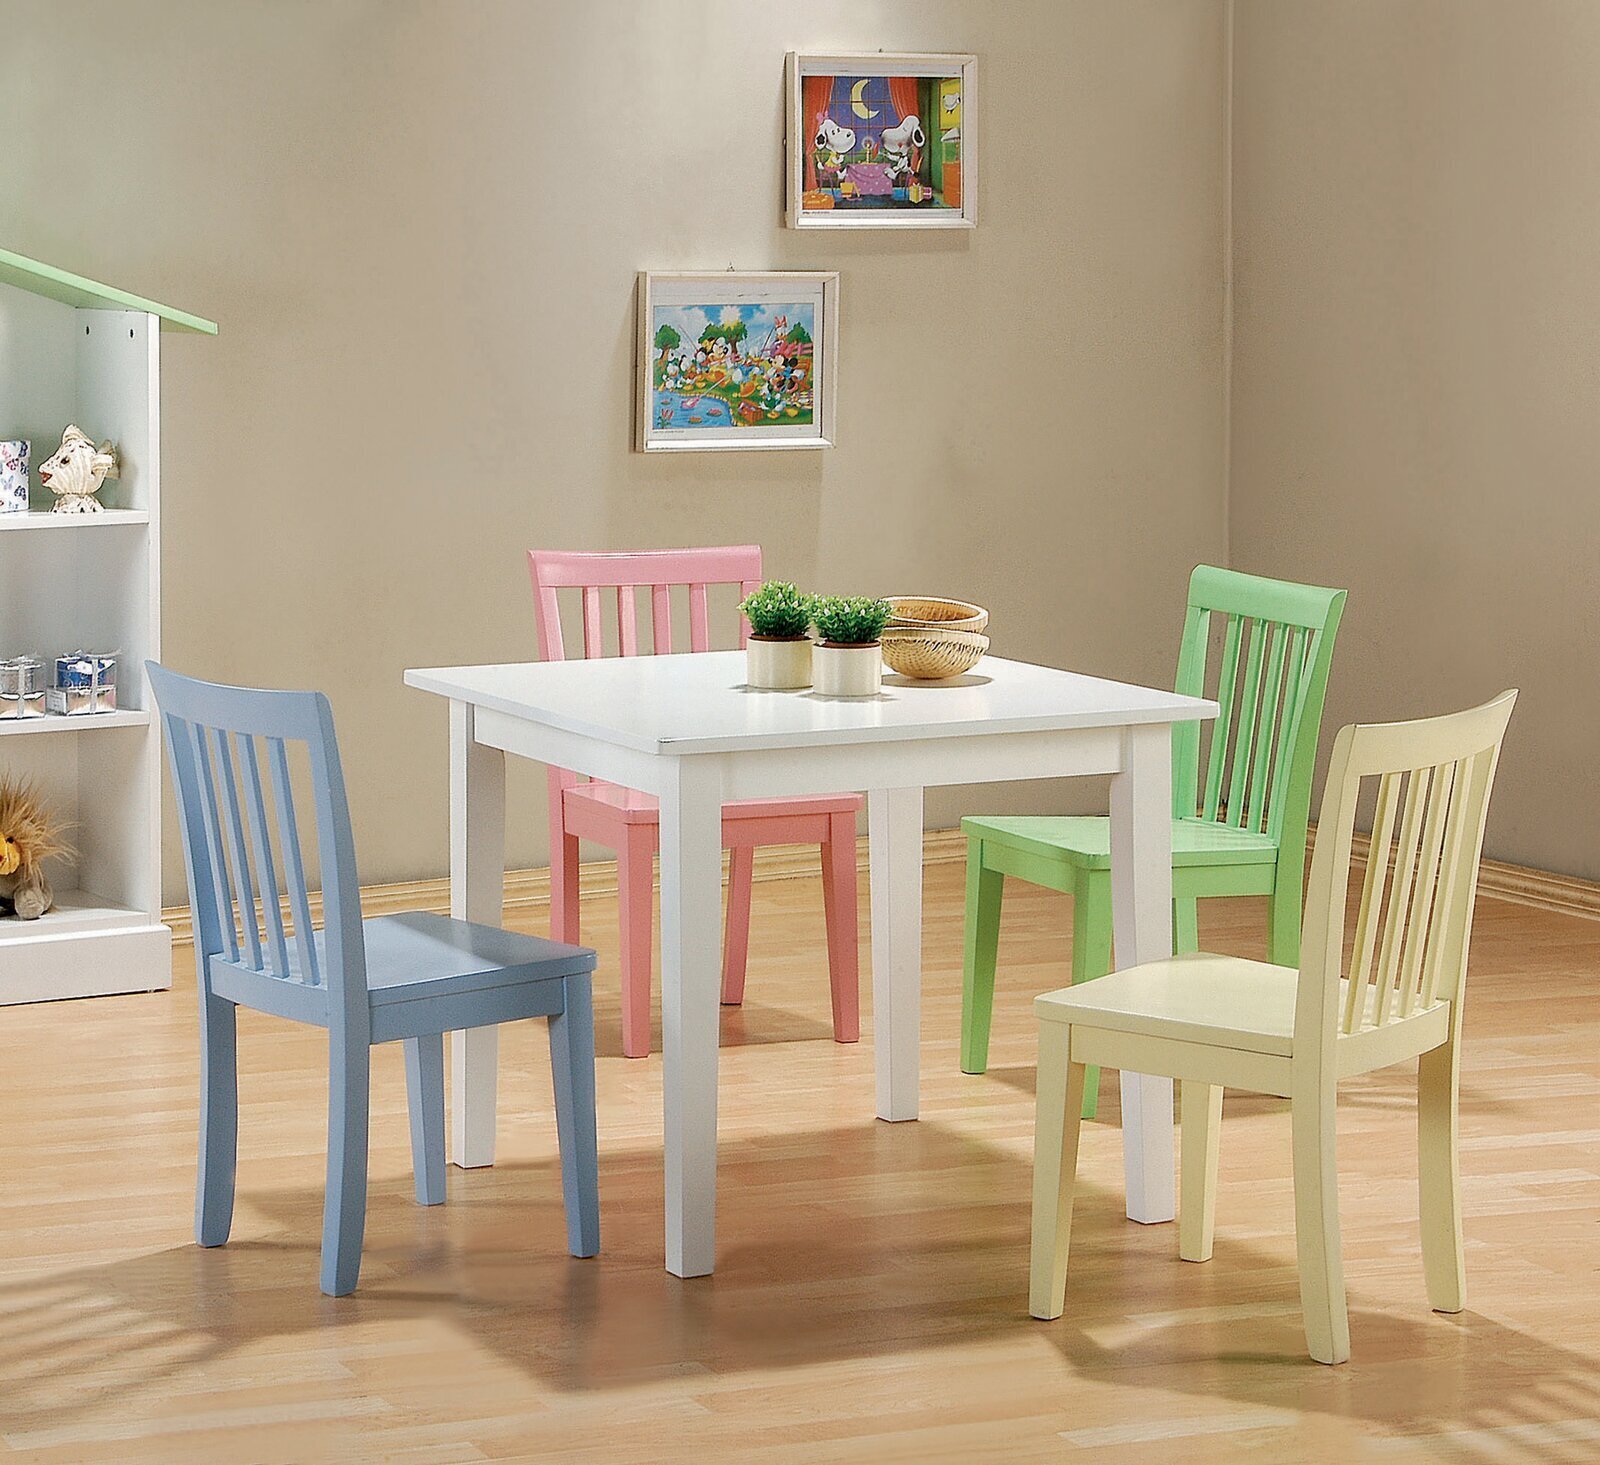 Colorful Wood Table and Chairs for Children